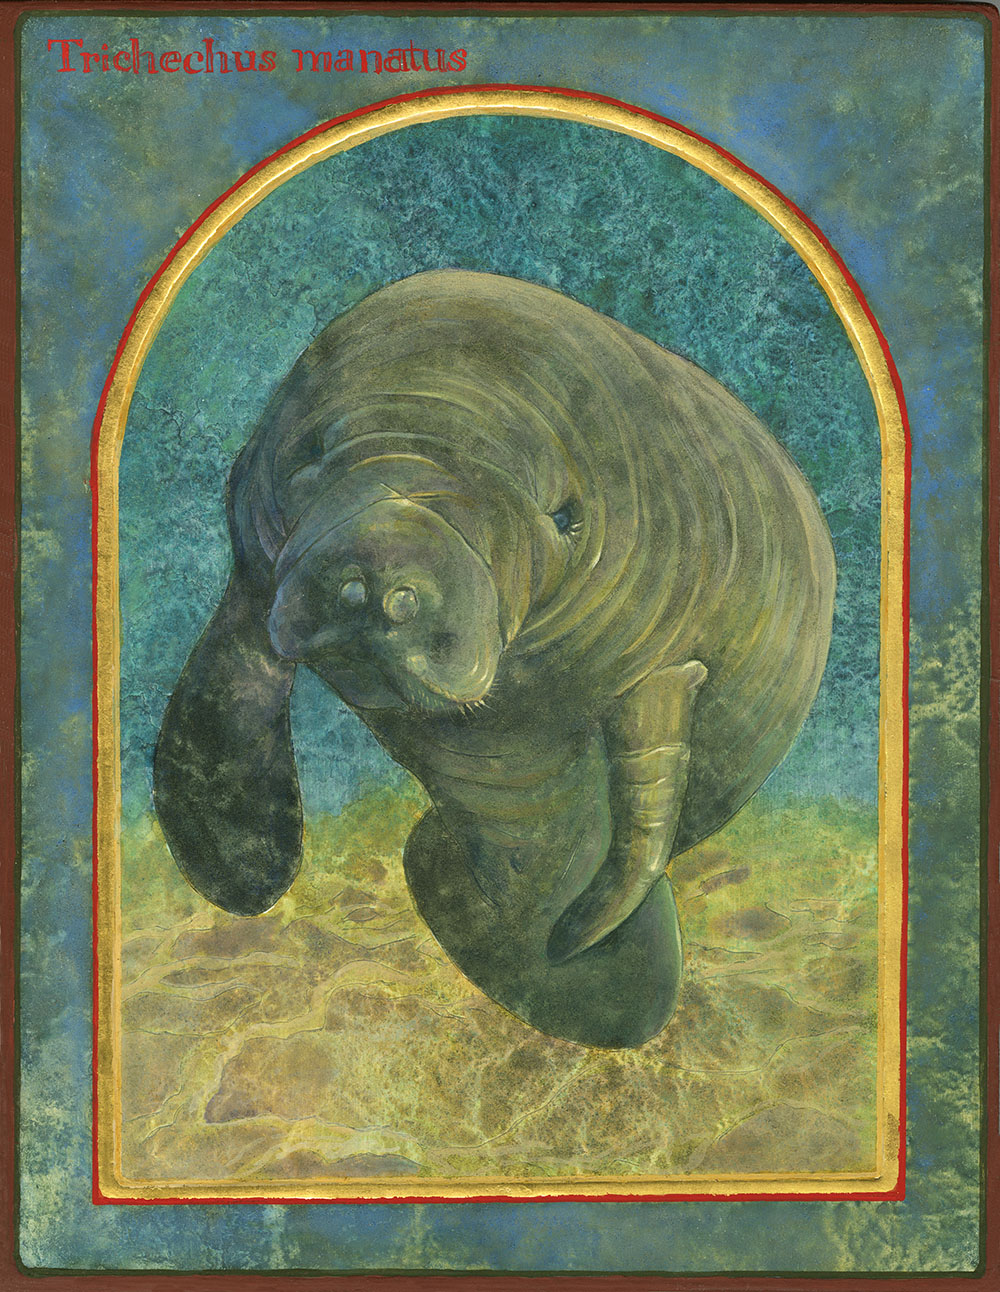 Angela Manno, The Florida Manatee, Trichechus Manatus. Egg Tempera and Gold Leaf on Wood. 9” x 7” x 1.” ©2022 Angela Manno. Courtesy of the artist.